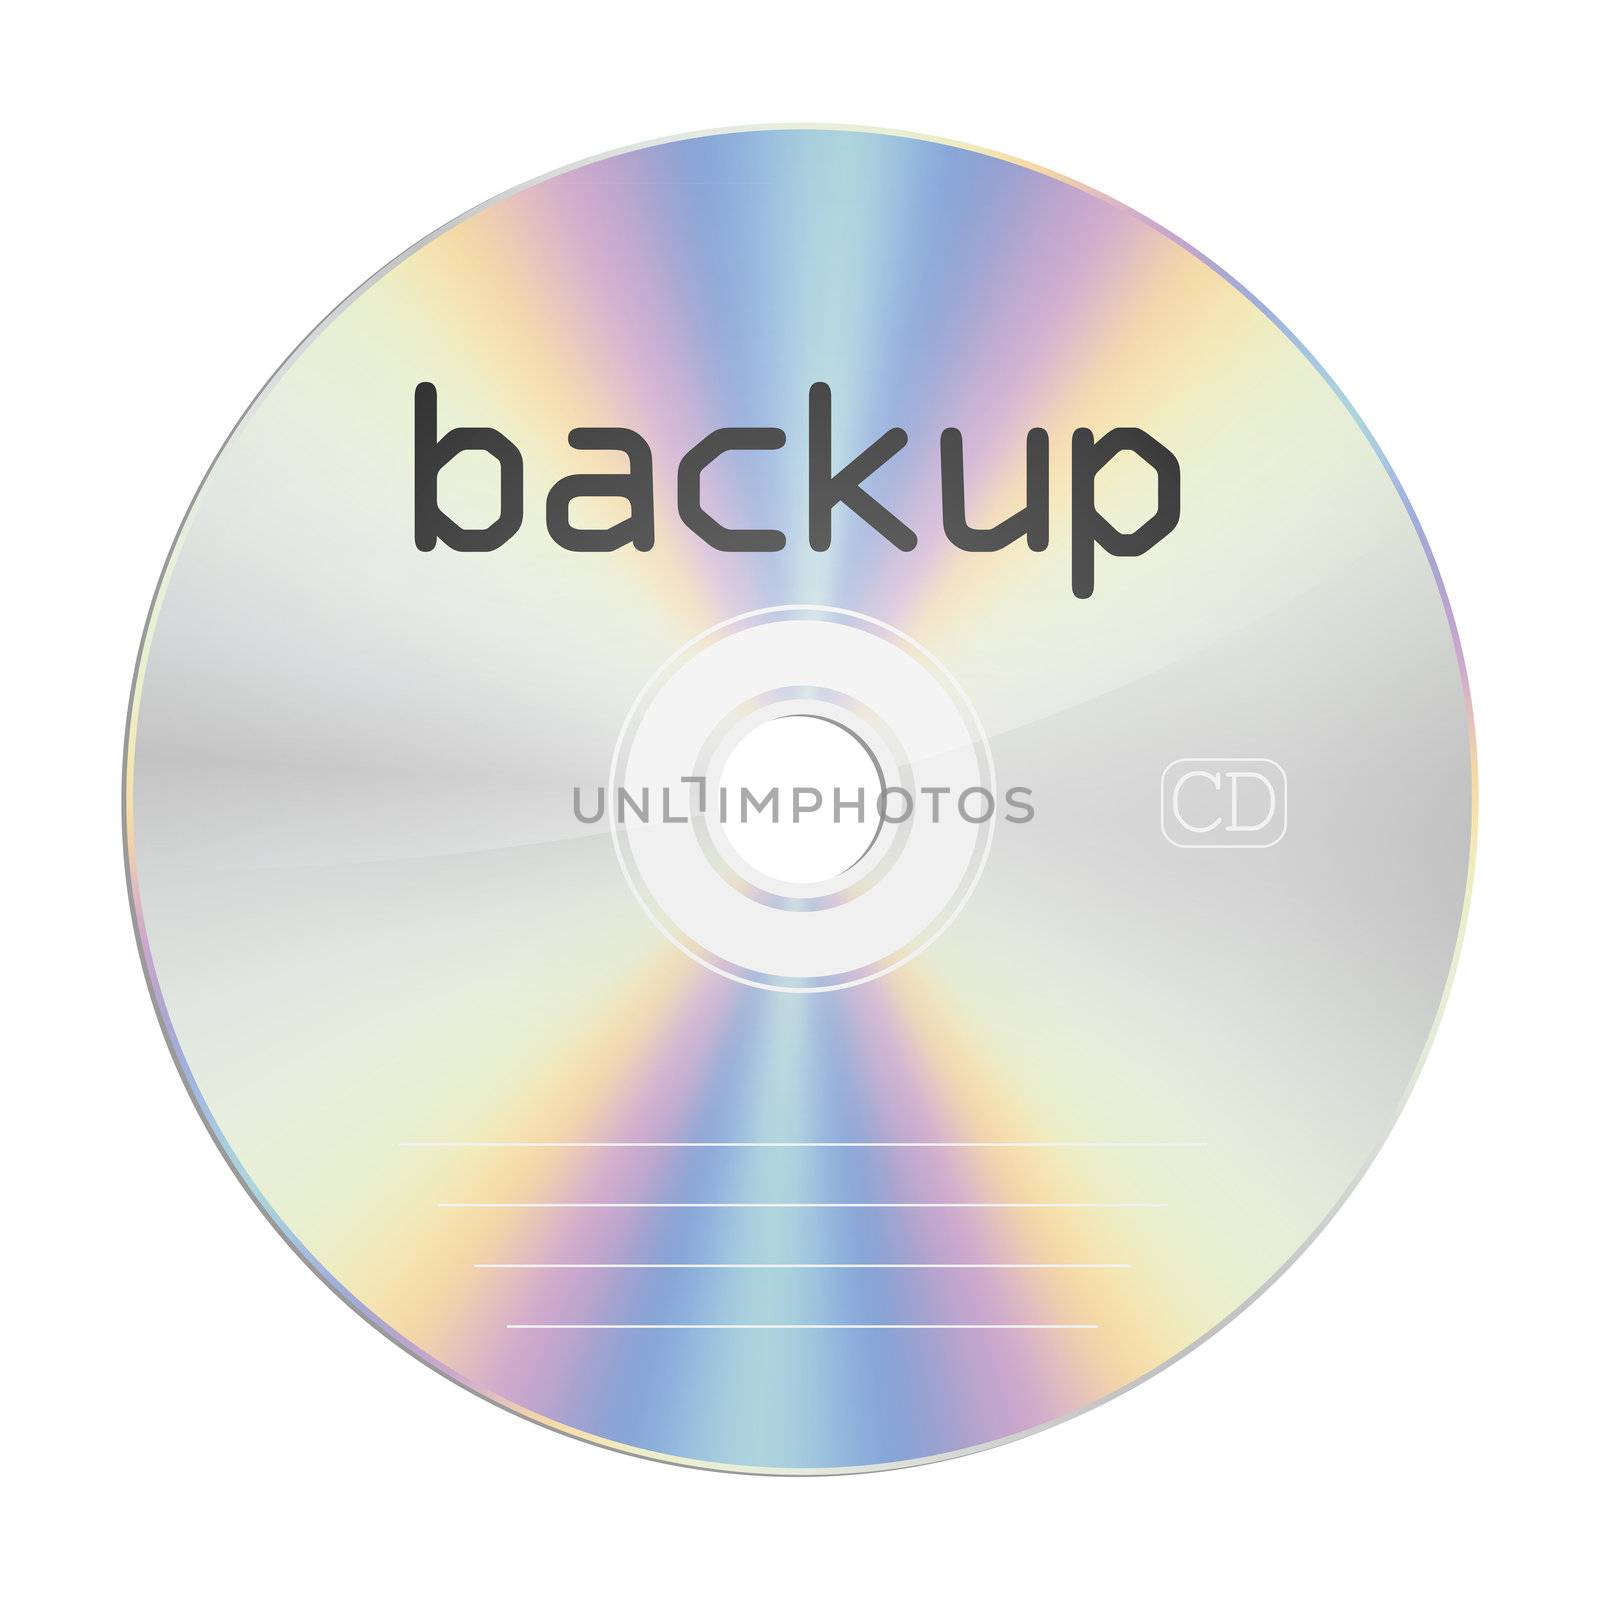 An image of a security compact disc backup